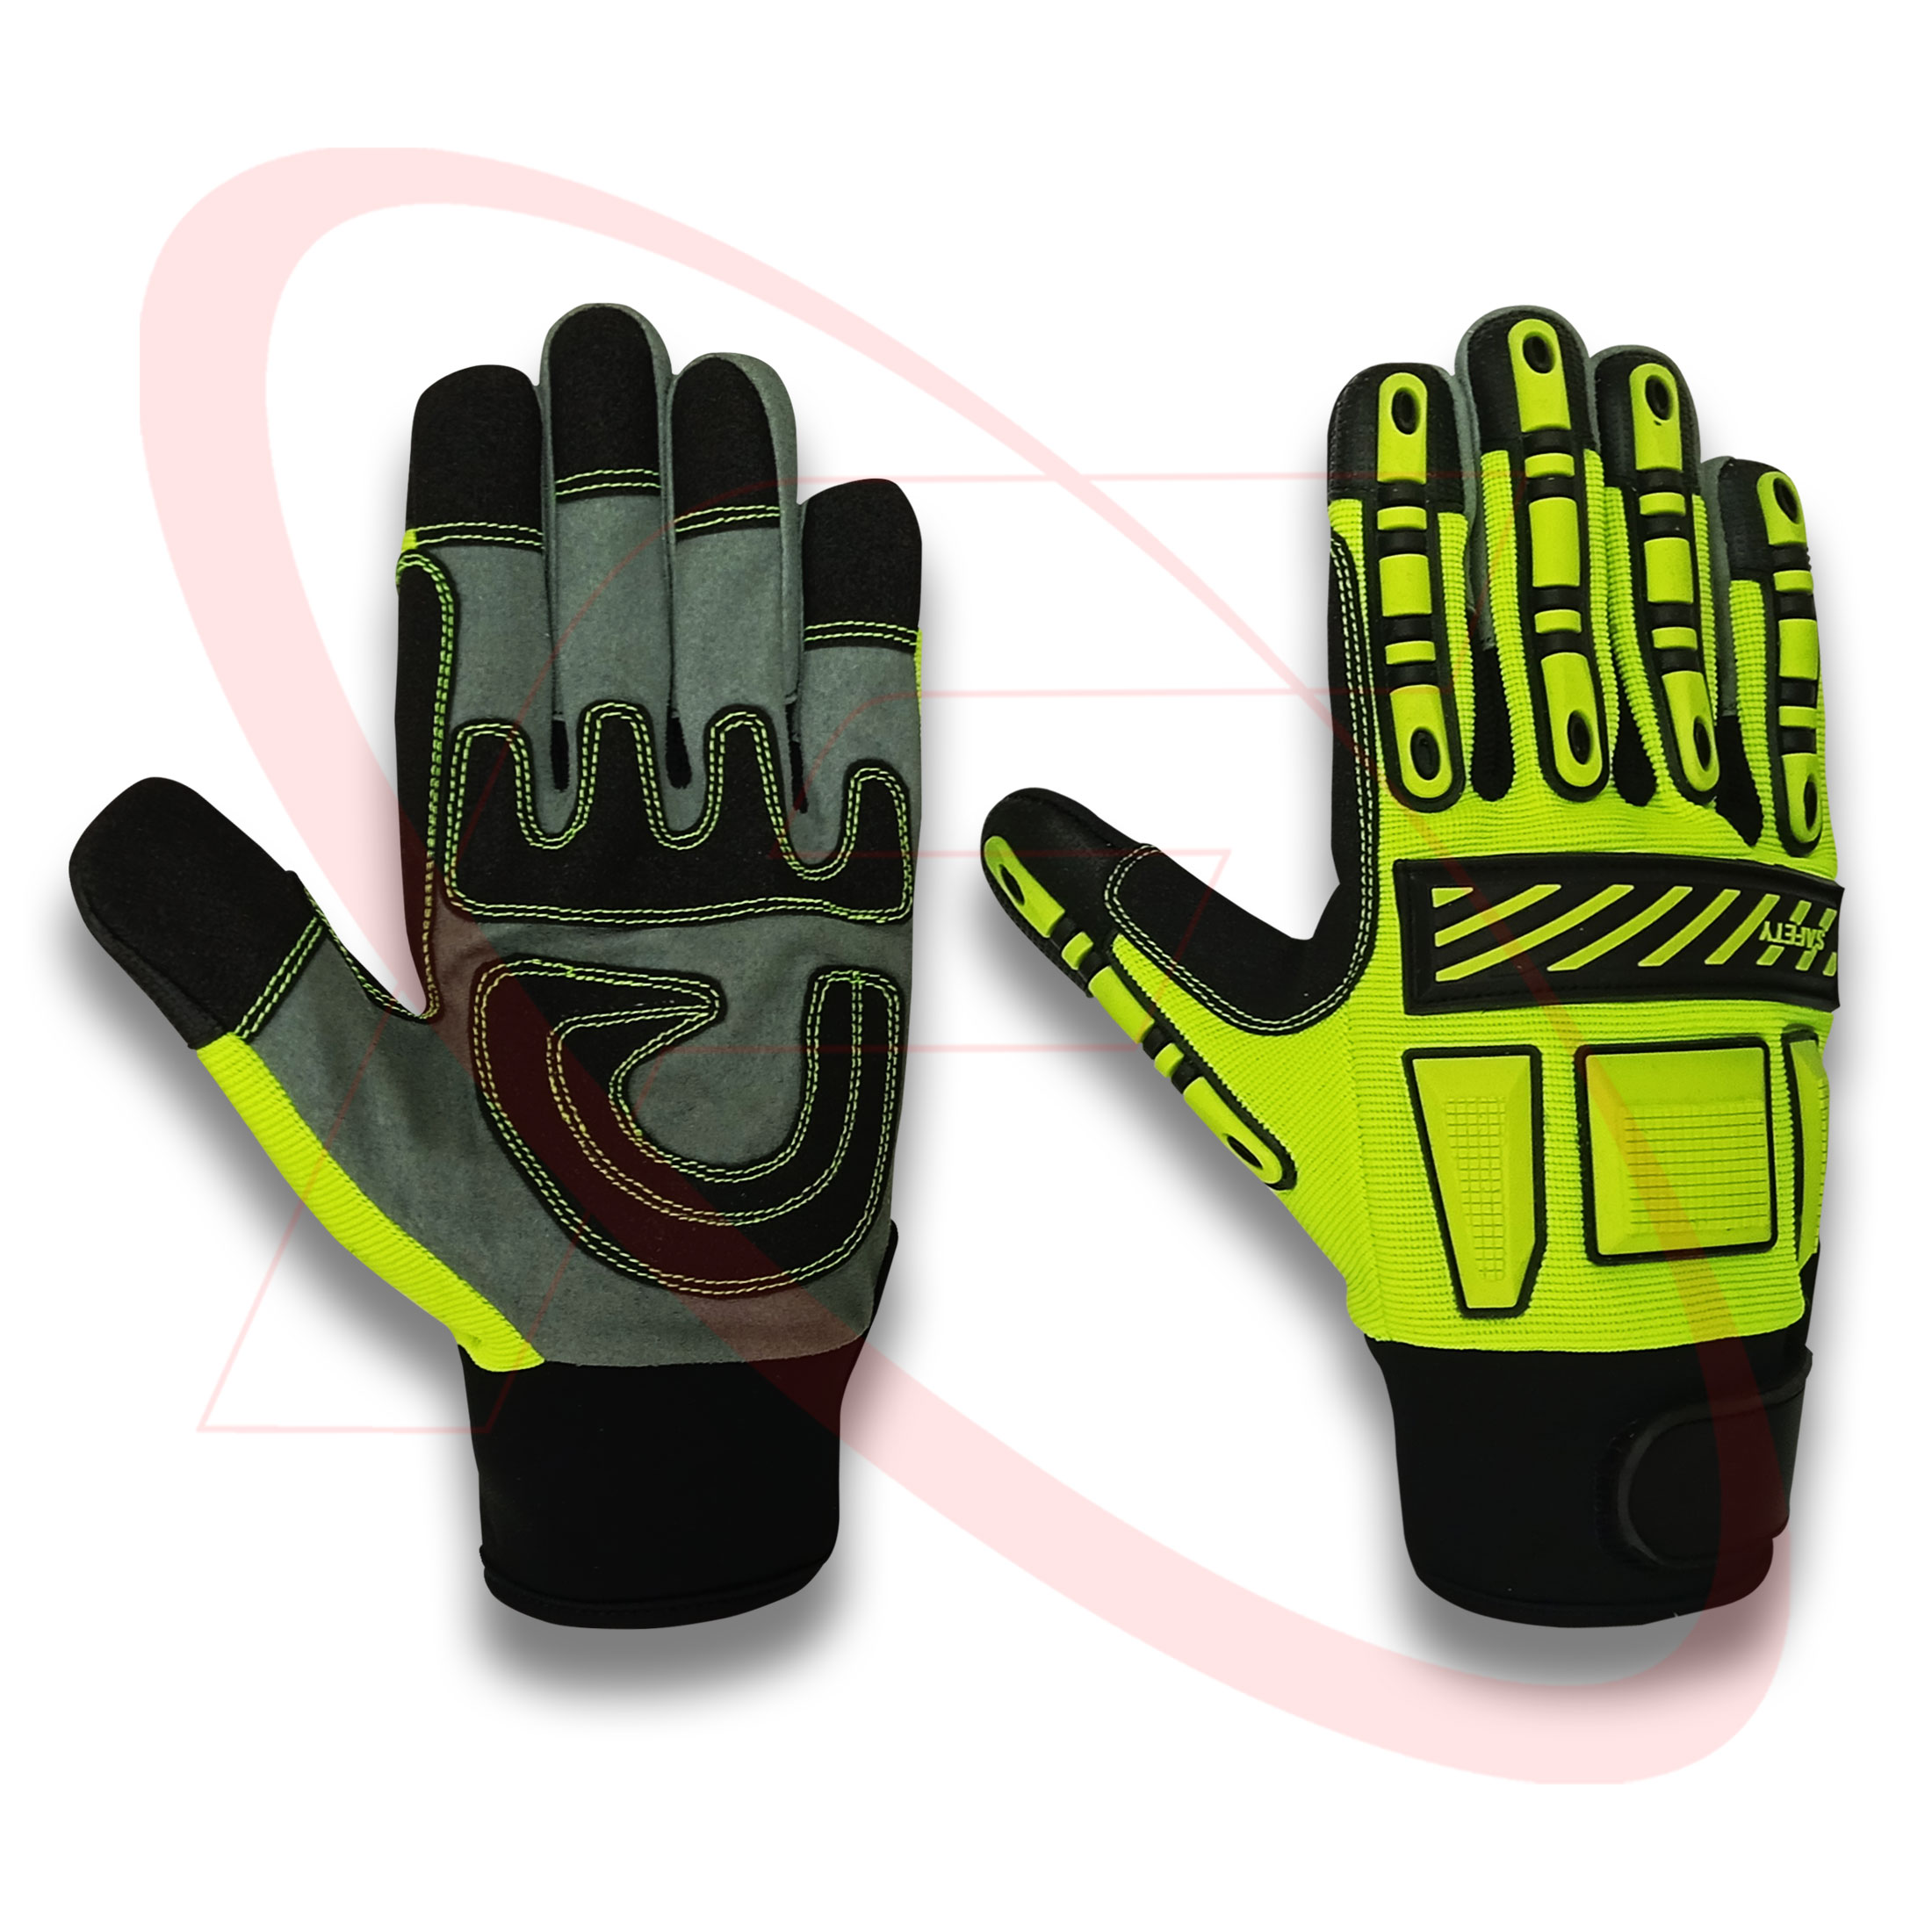 Impact Protective Mechanic Safety Gloves Cut Resistant Gloves for Oilfield Workers Protection Gloves